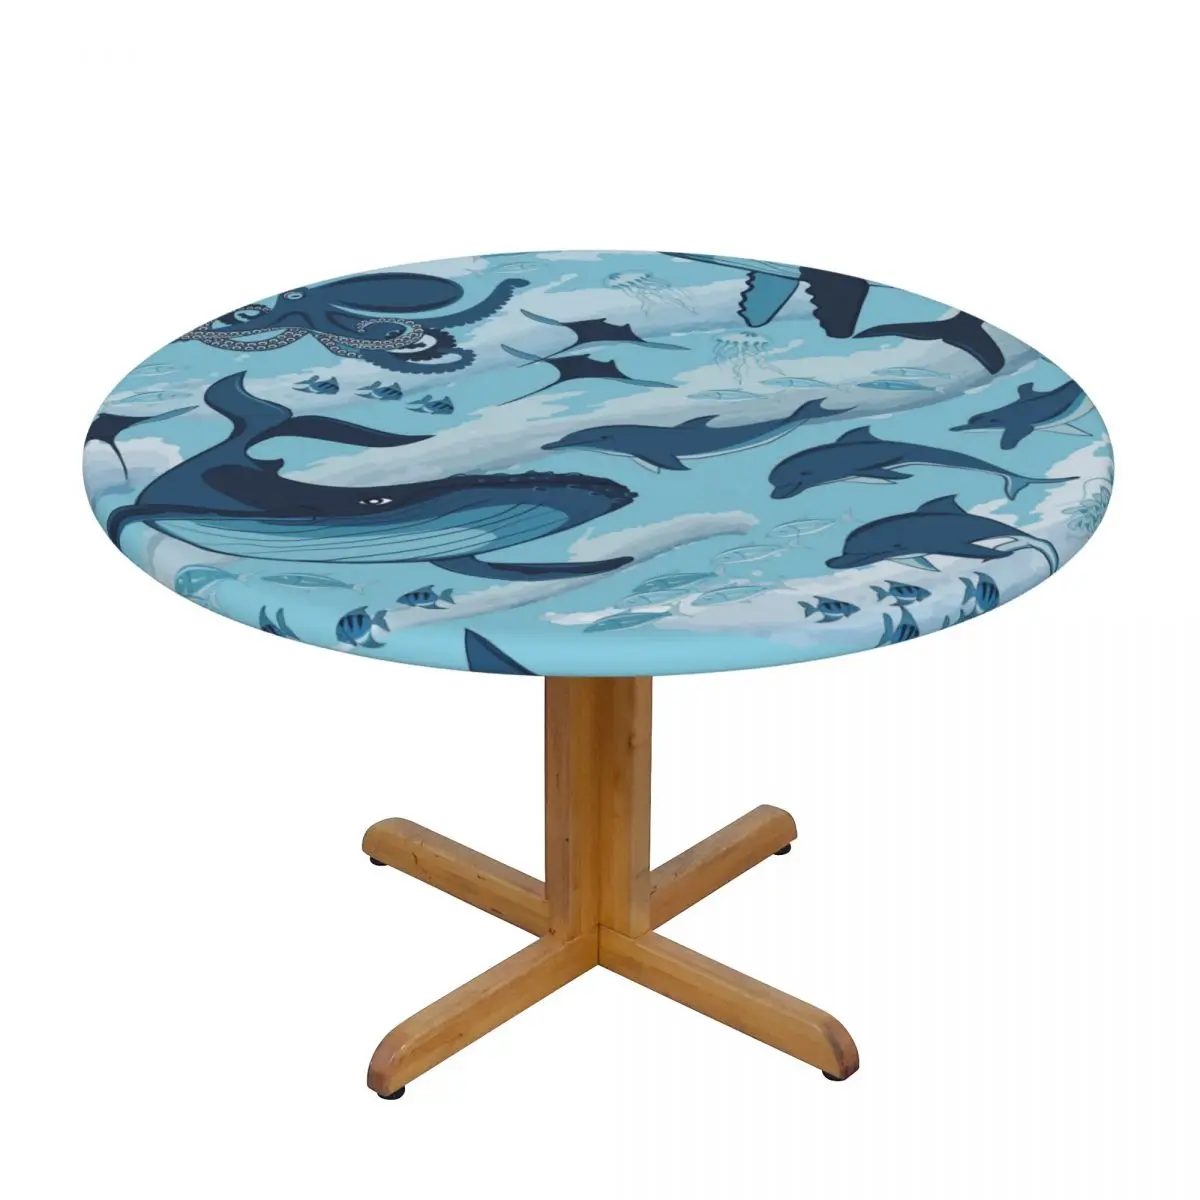 

Round Table Cover Cloth Protector Polyester Tablecloth Blue Whales And Underwater Fishes Fitted Table Cover with Elastic Edged